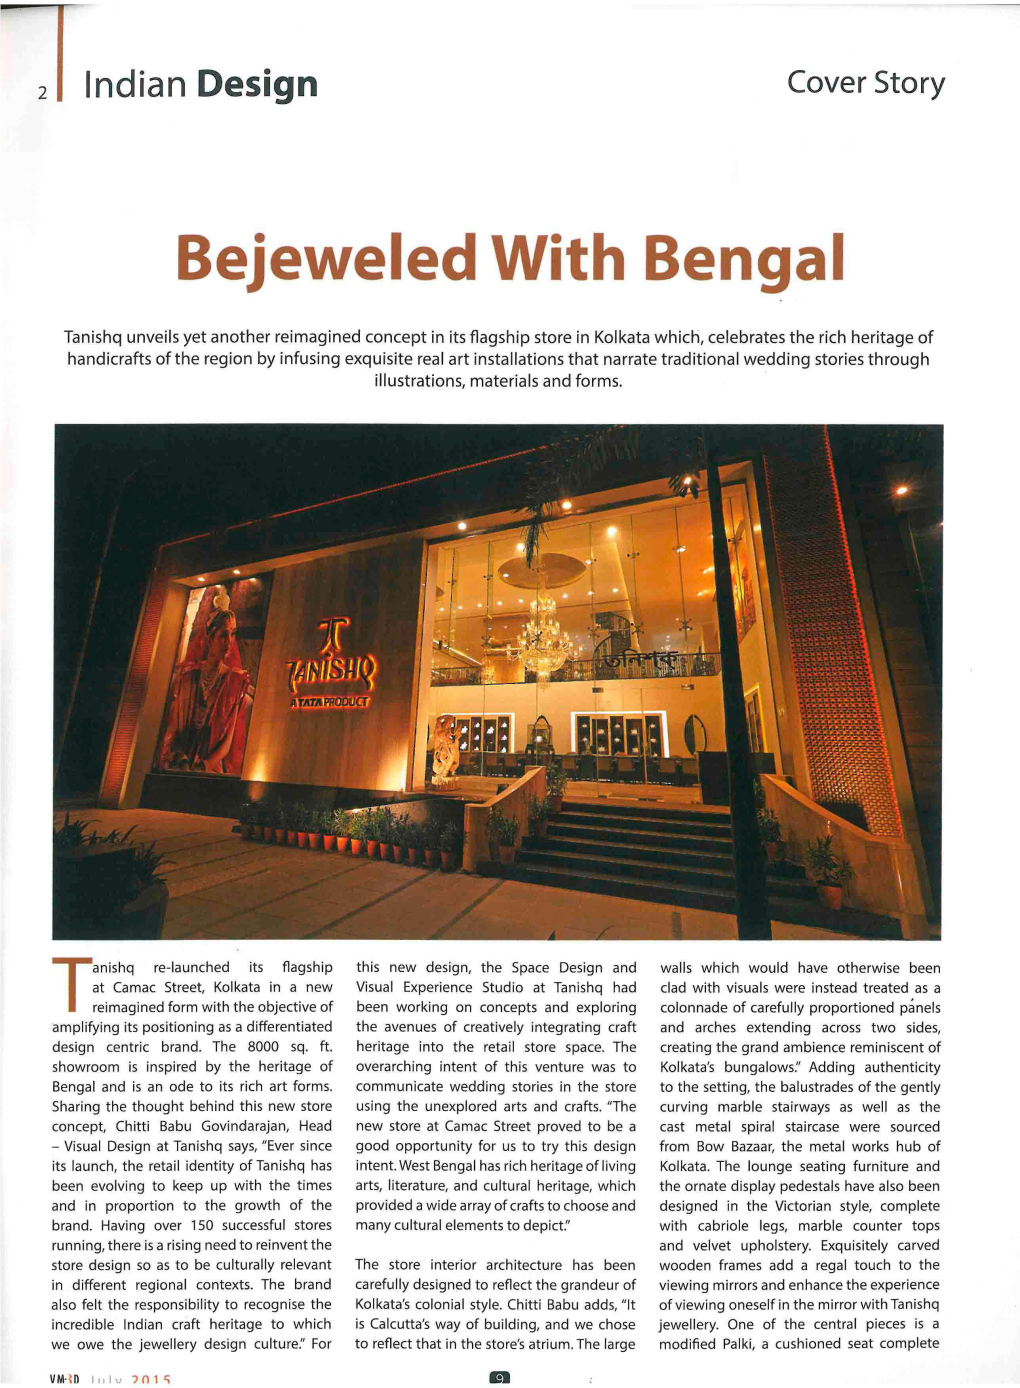 Bejeweled with Bengal